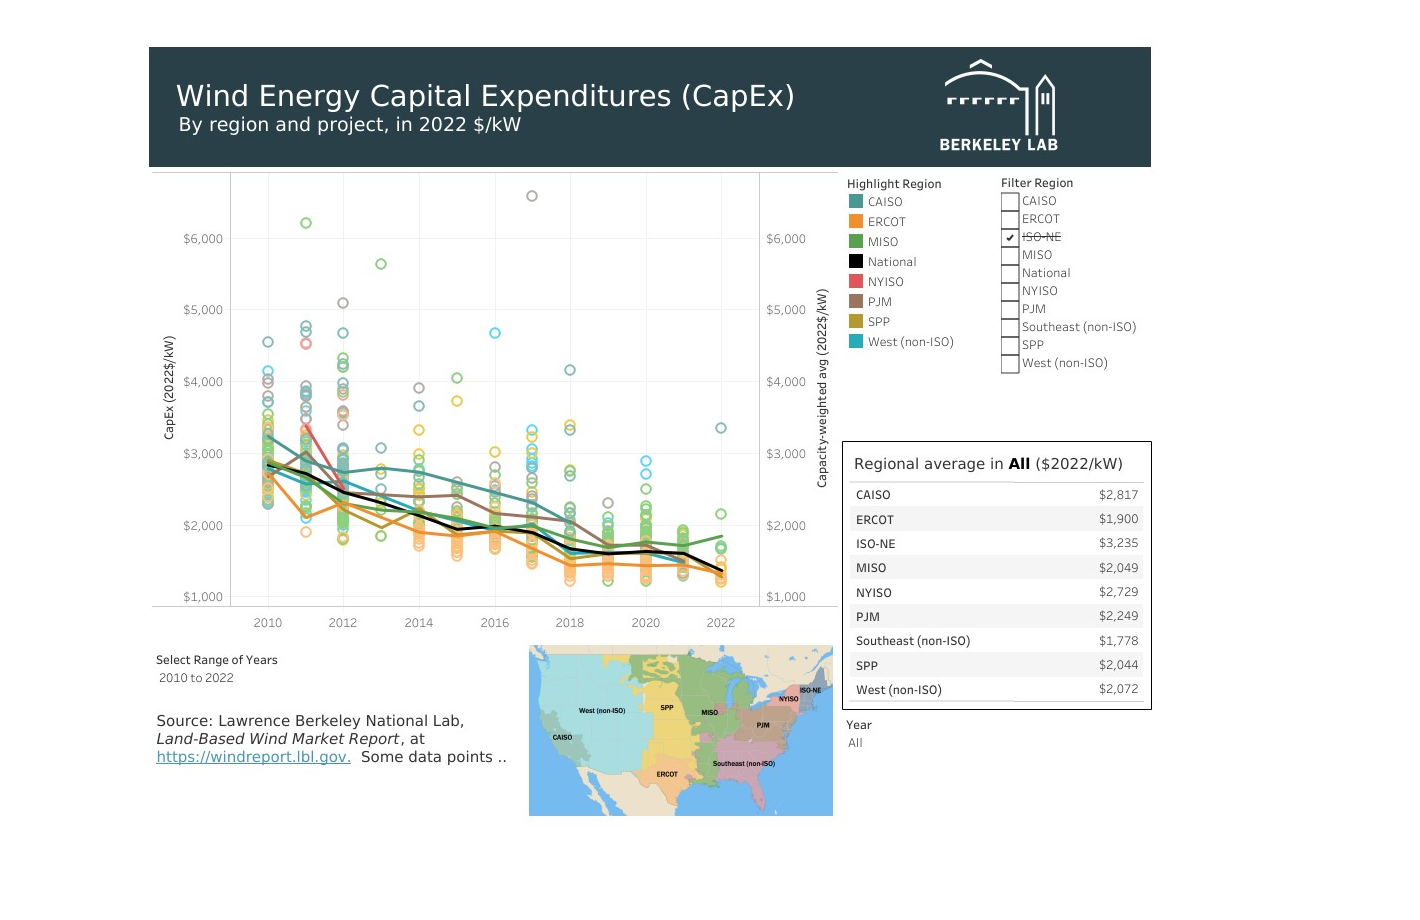 Evolution of wind energy CapEx in the US